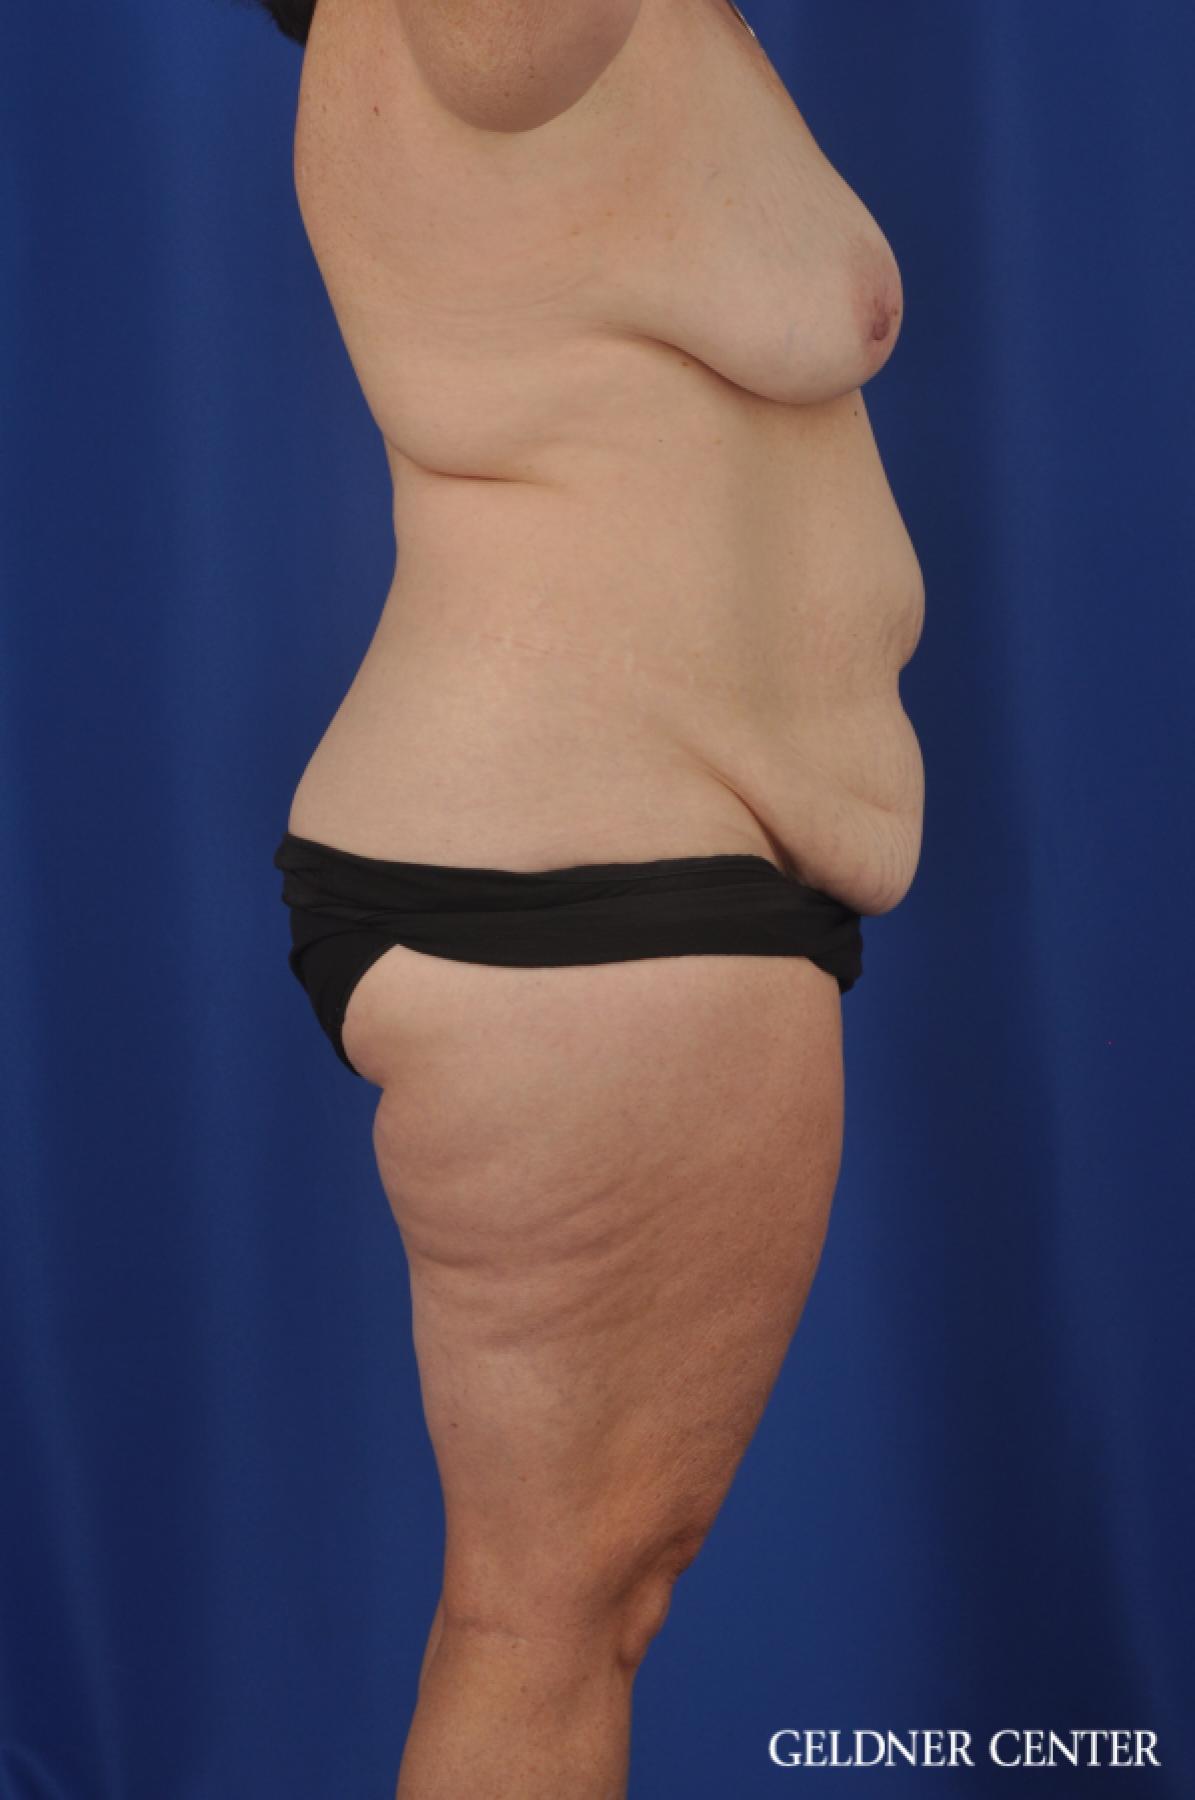 Abdominoplasty Patient 1 before and after photos - Before 3